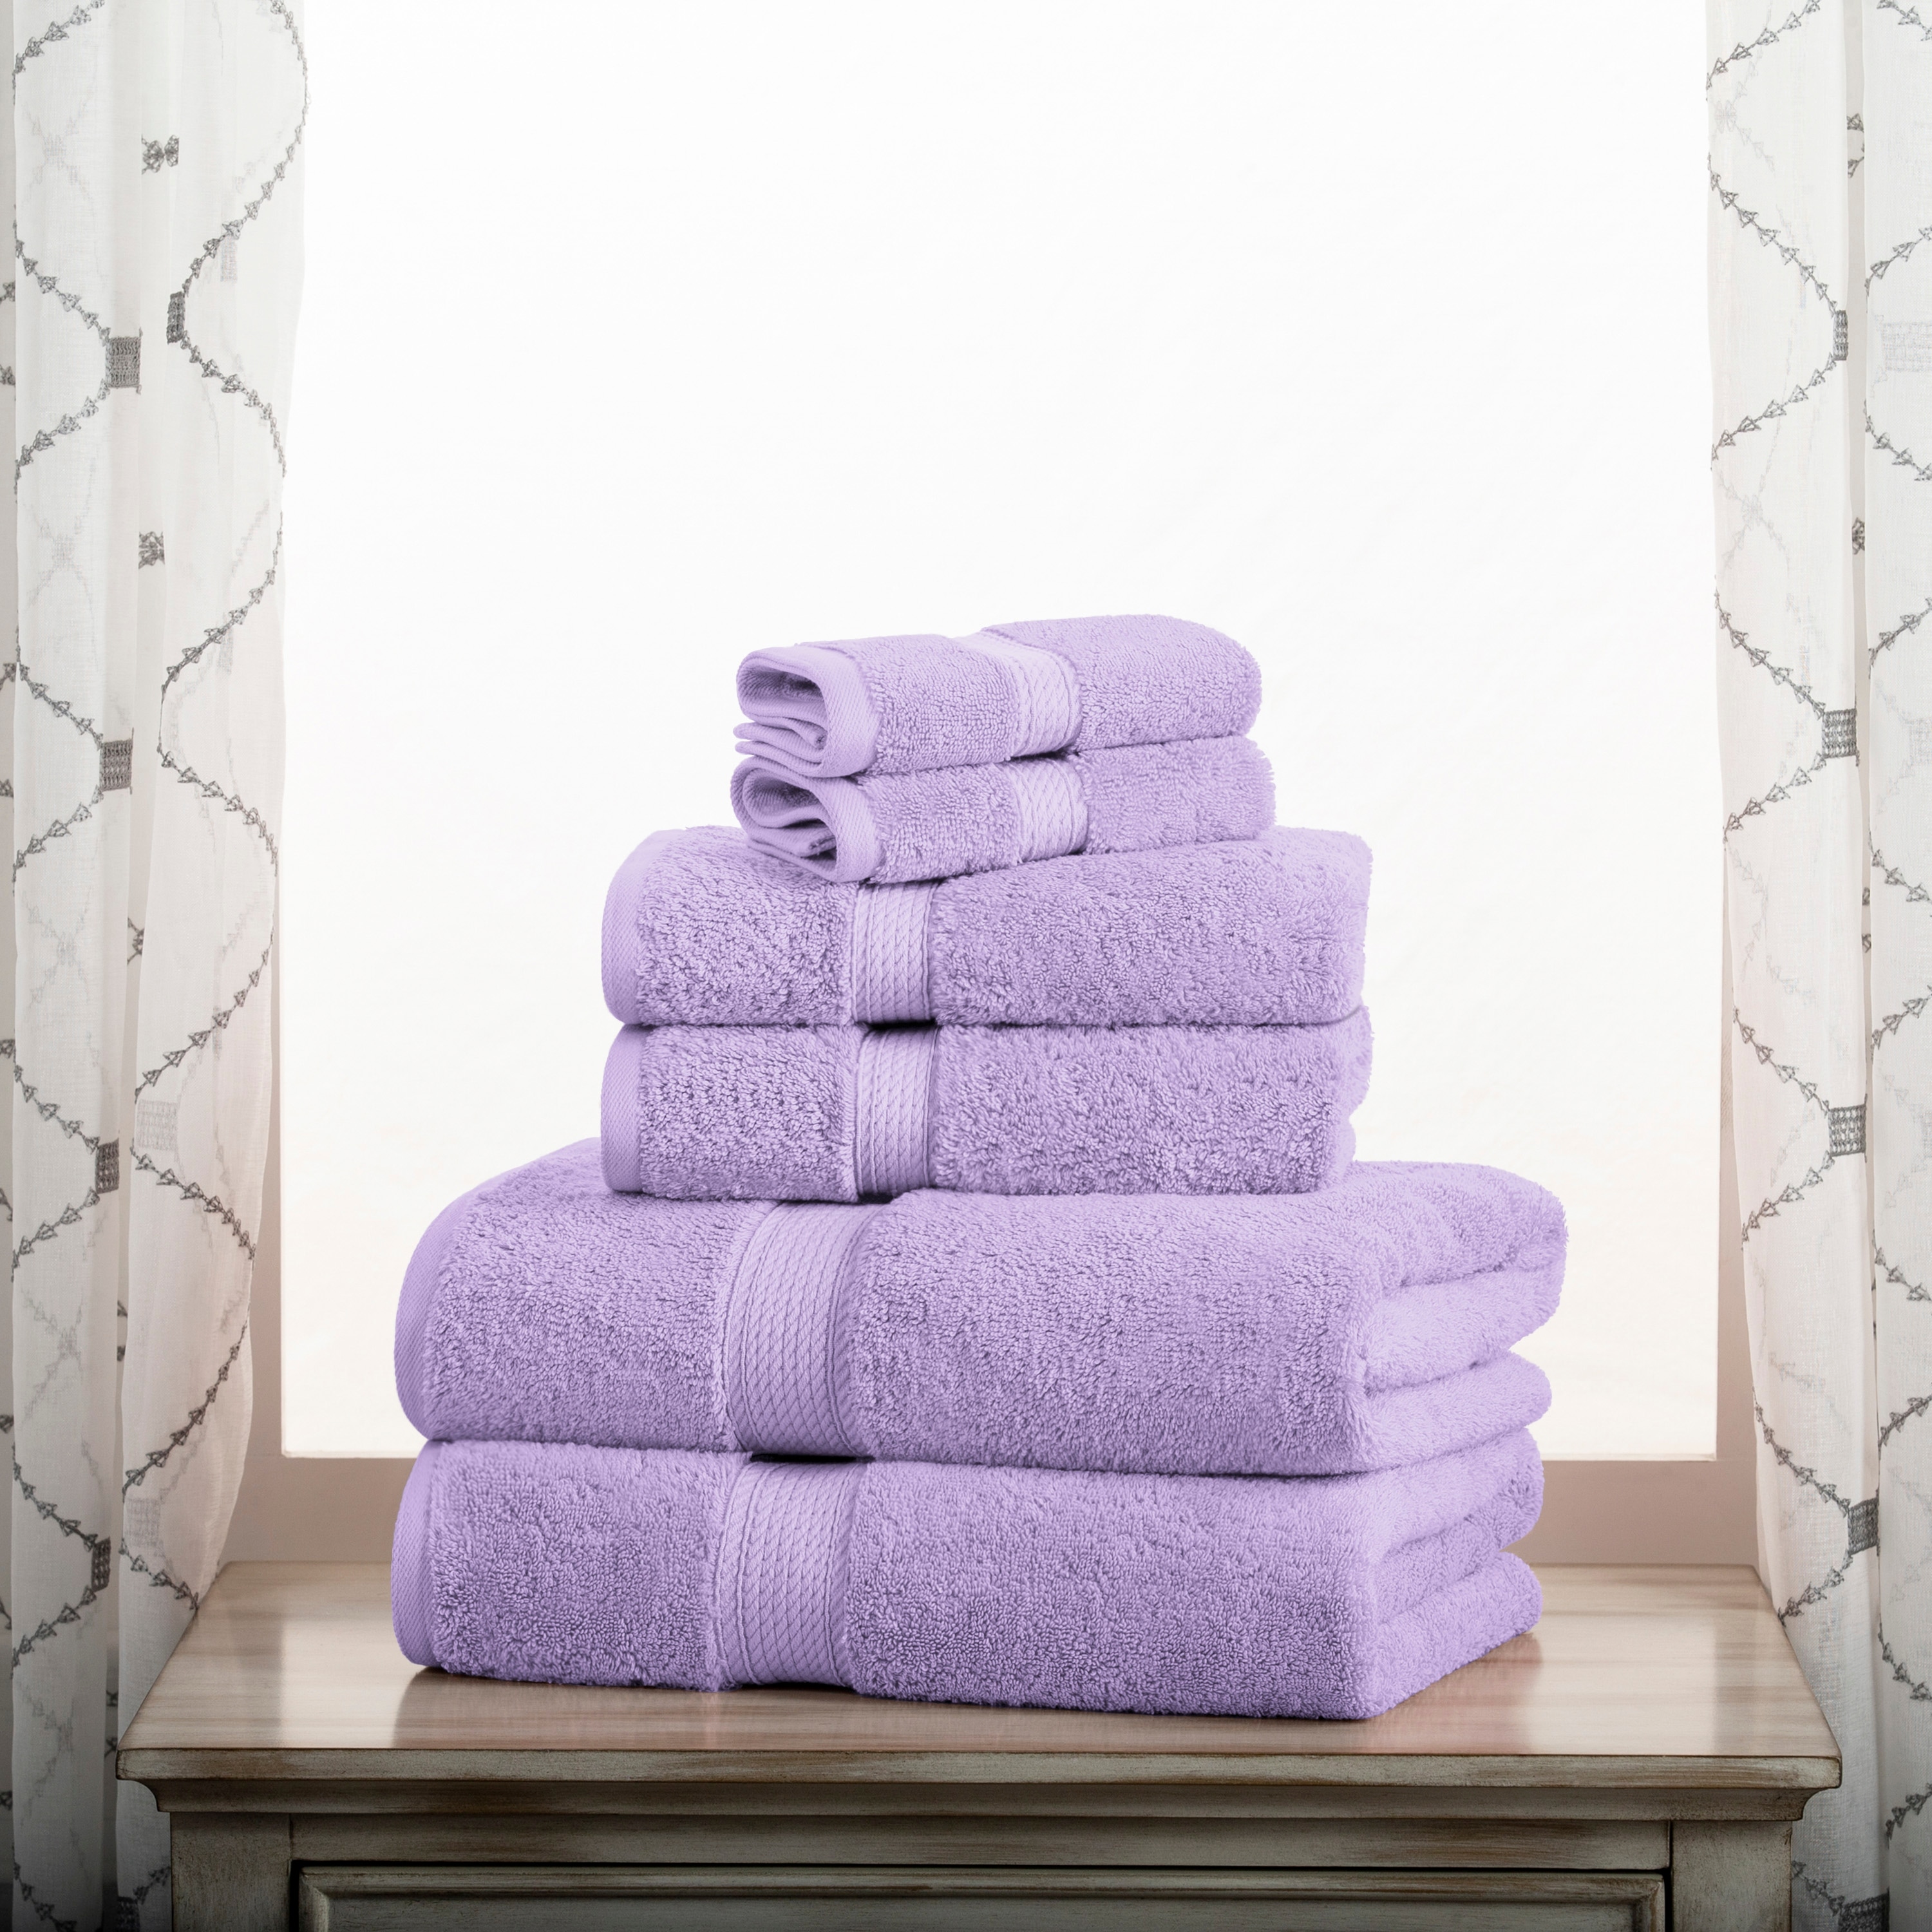 https://ak1.ostkcdn.com/images/products/is/images/direct/ba6c48794dc1fad720d026837976670cfc916562/Egyptian-Cotton-Heavyweight-Solid-Plush-Towel-Set-by-Superior.jpg